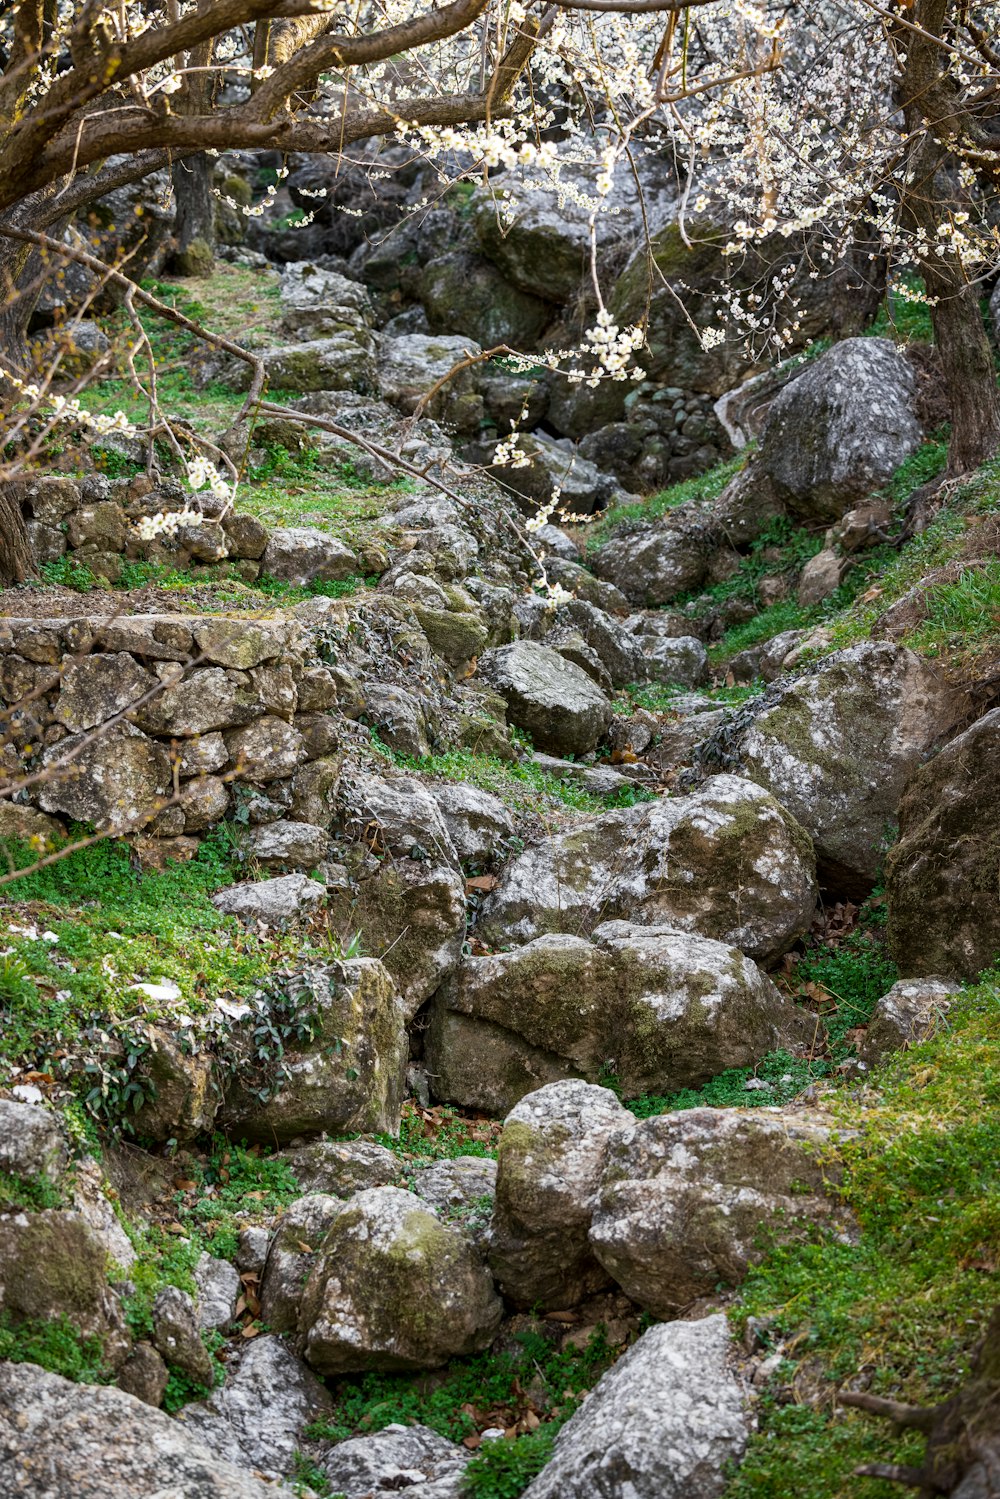 a rocky path with moss growing on the rocks